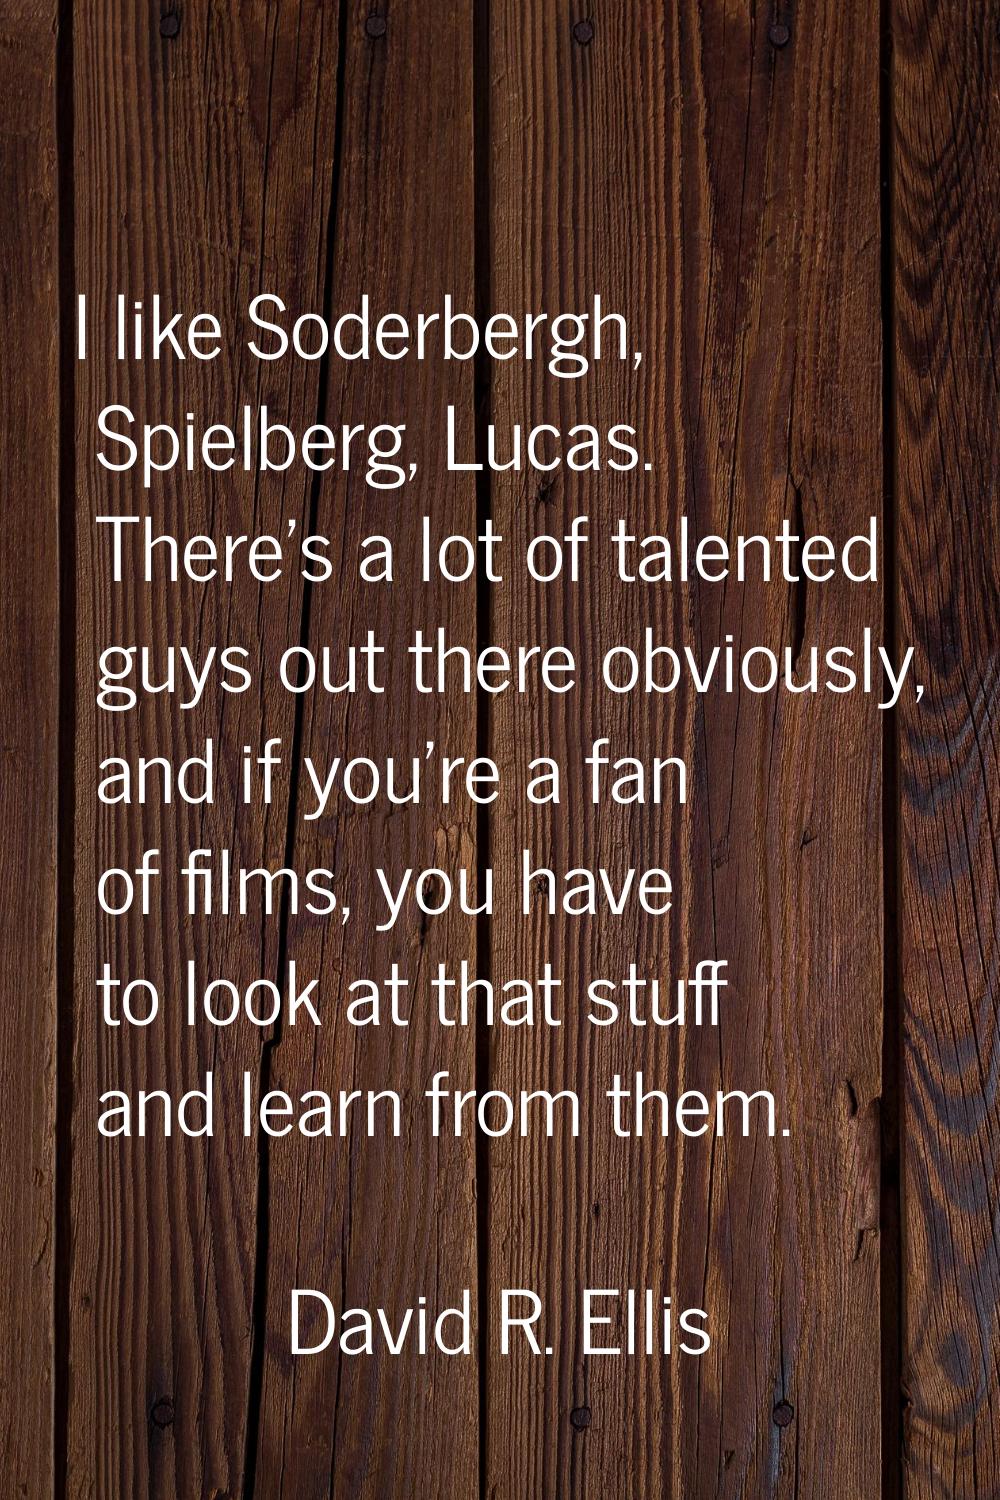 I like Soderbergh, Spielberg, Lucas. There's a lot of talented guys out there obviously, and if you